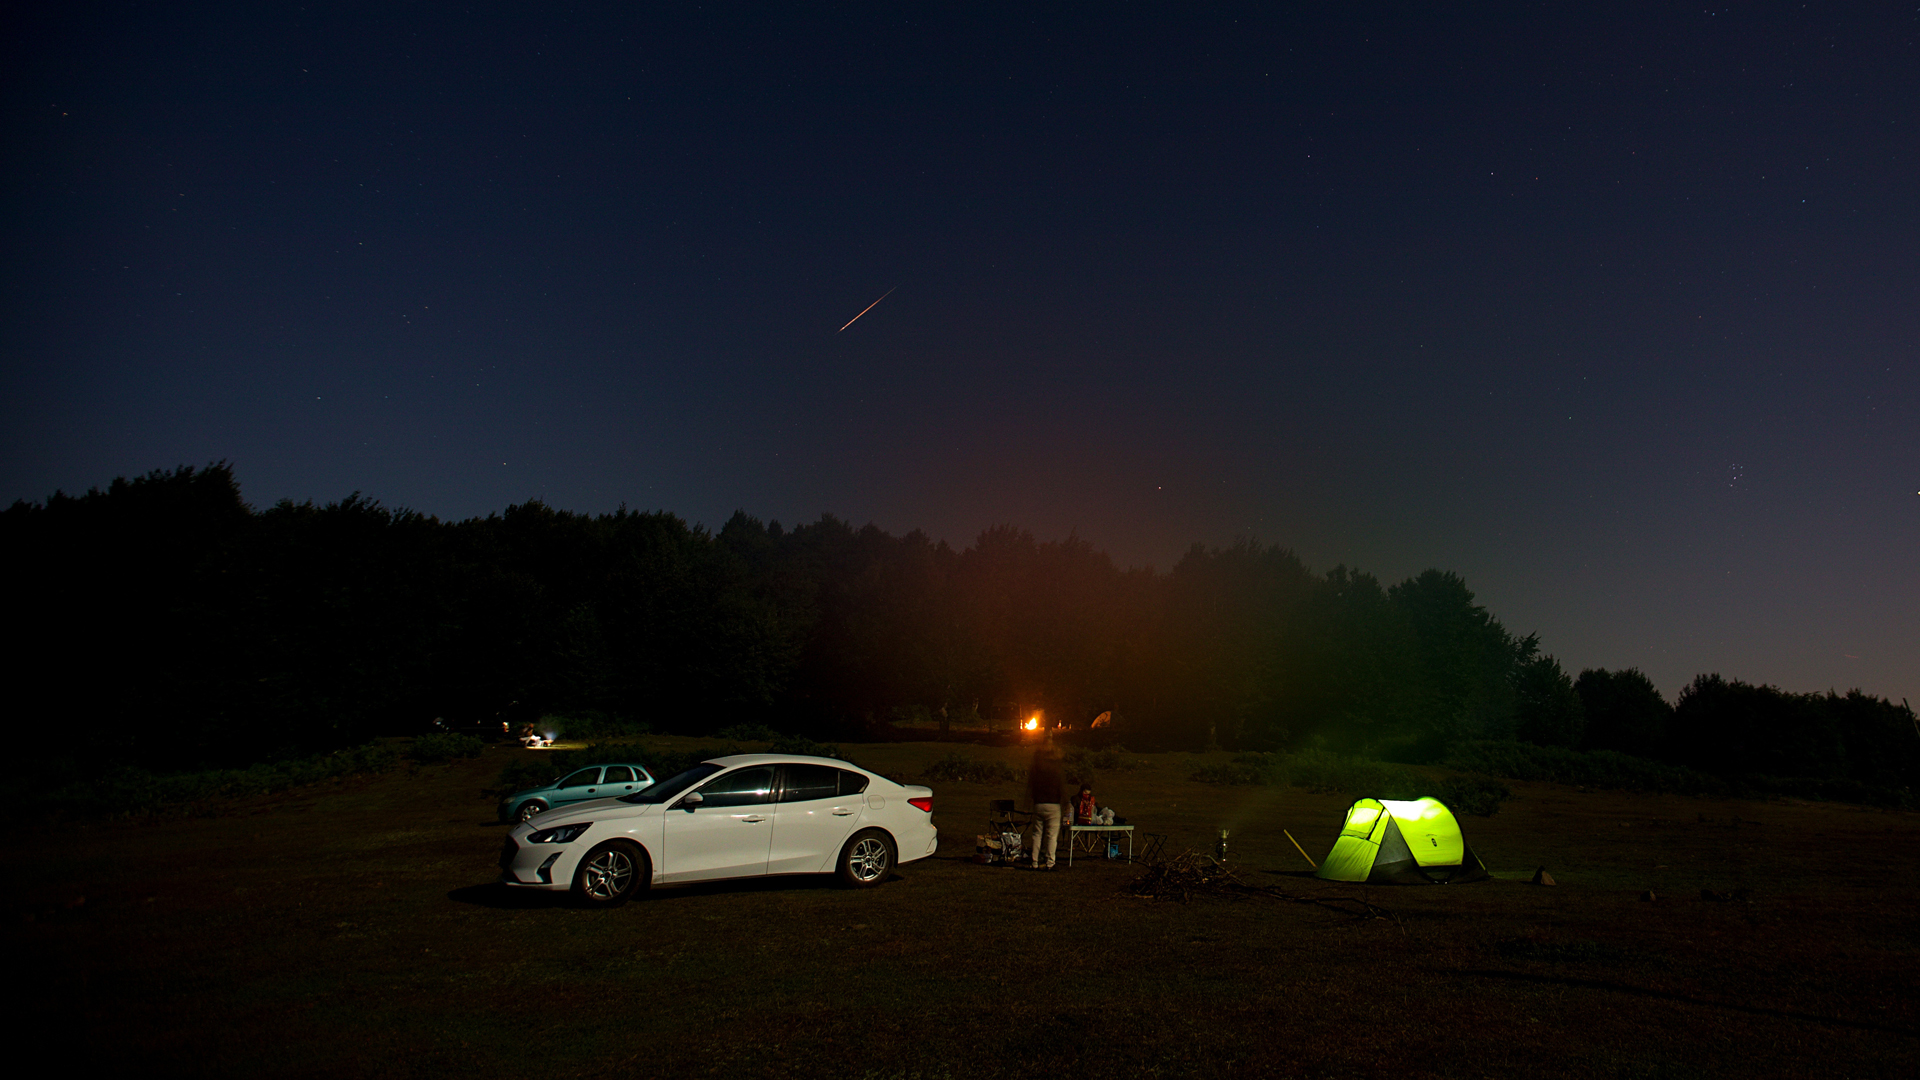 A Perseid meteor lines up over a green tent campsite in Turkey.